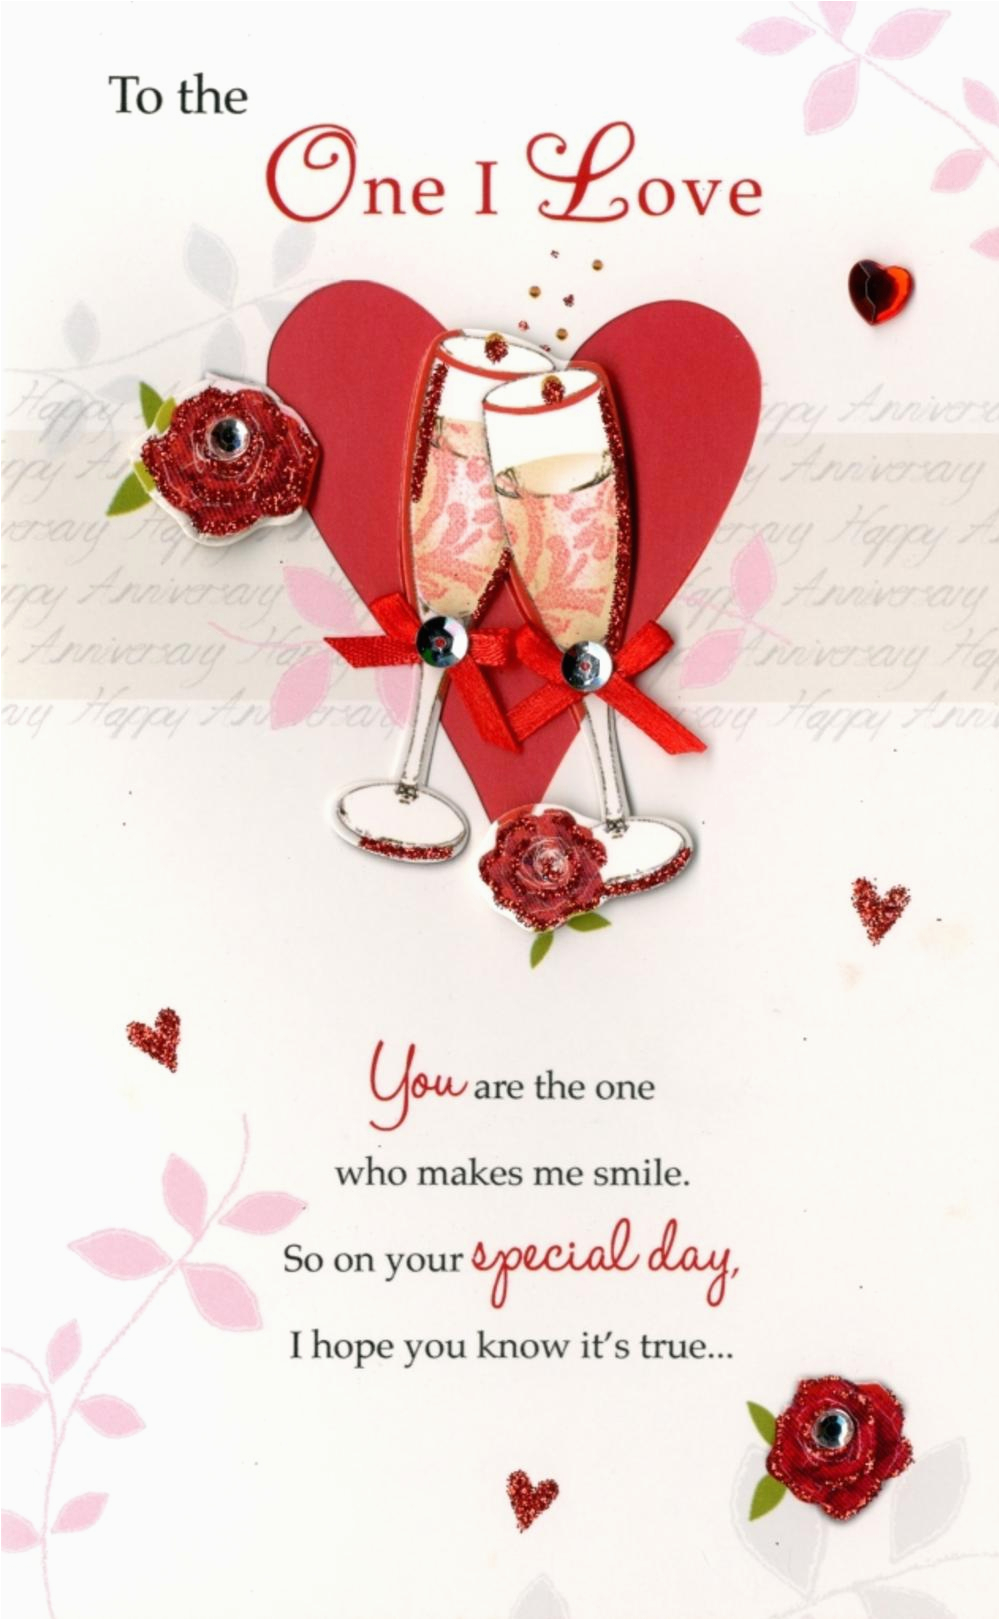 kcsnpc196 happy birthday to the one i love greeting card second nature poem corner cards